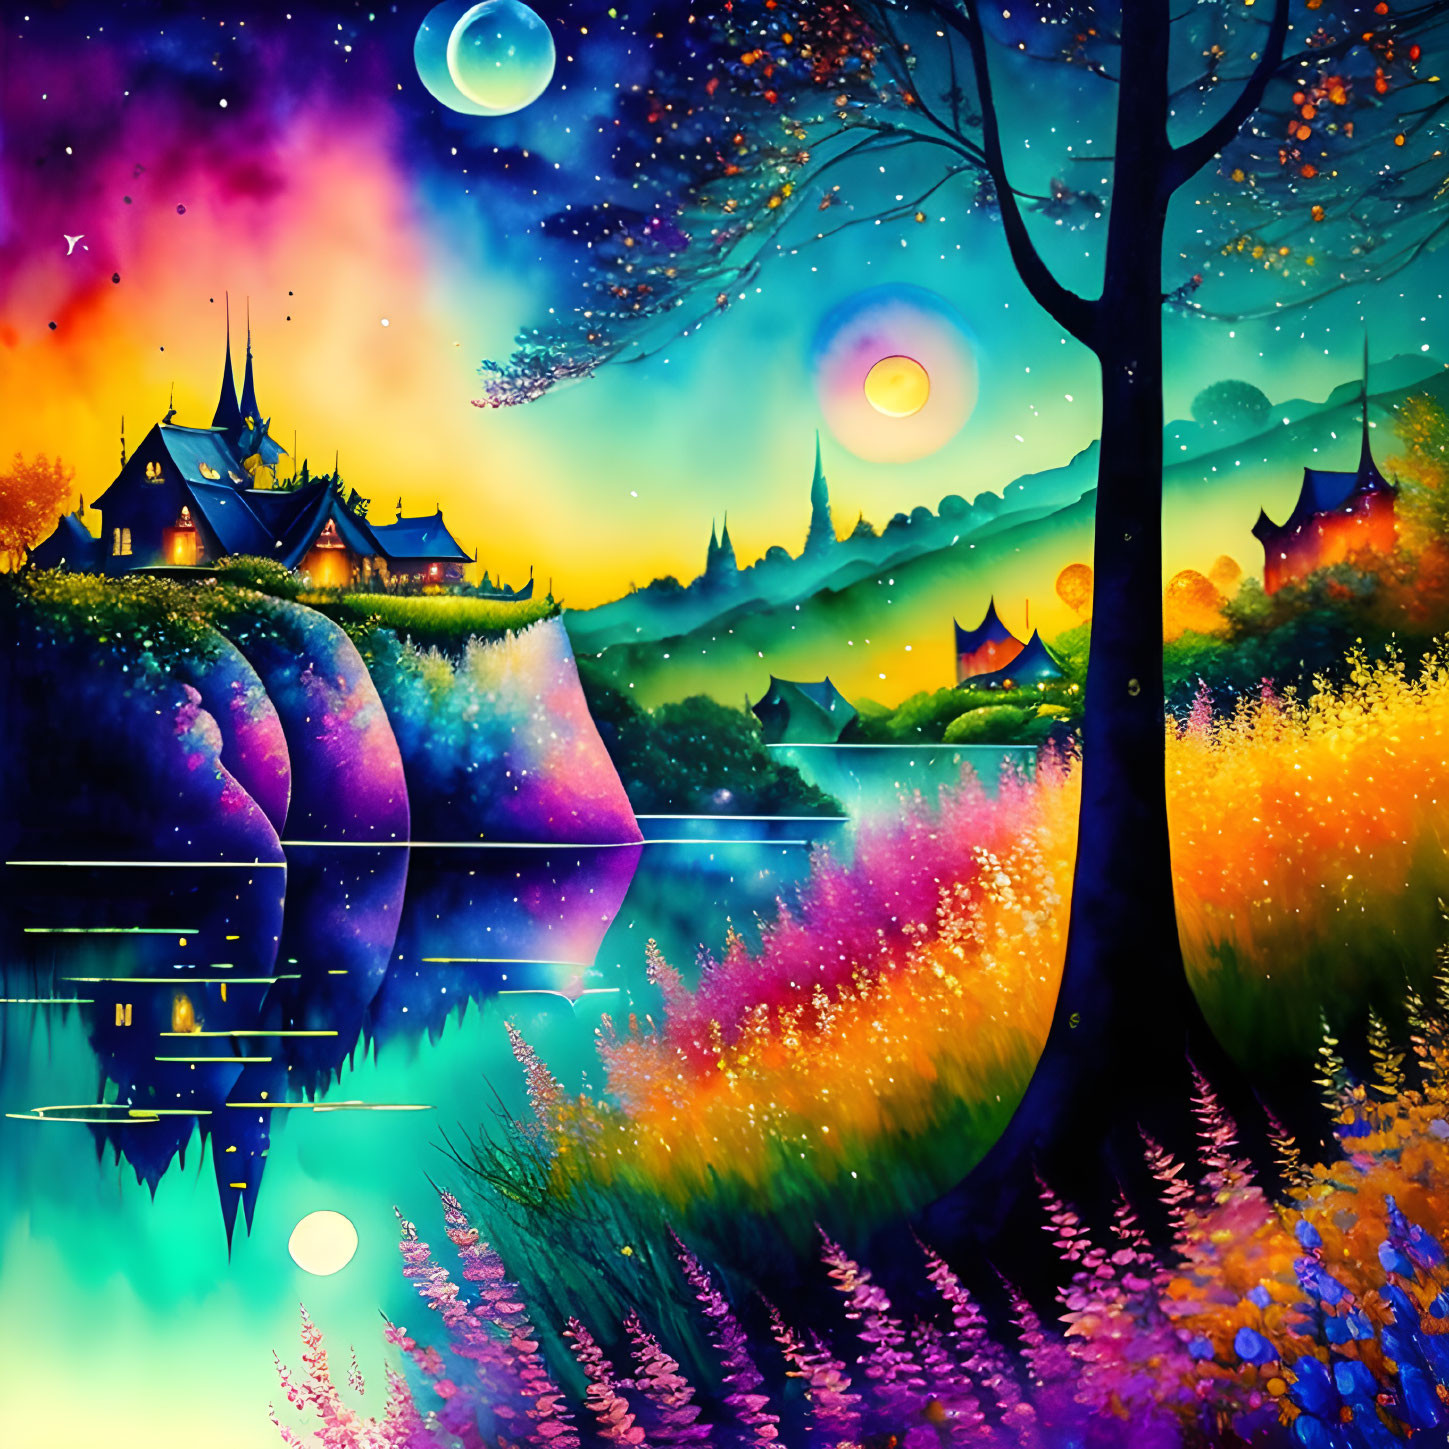 Colorful Fantasy Landscape with Luminous Tree and Whimsical Houses